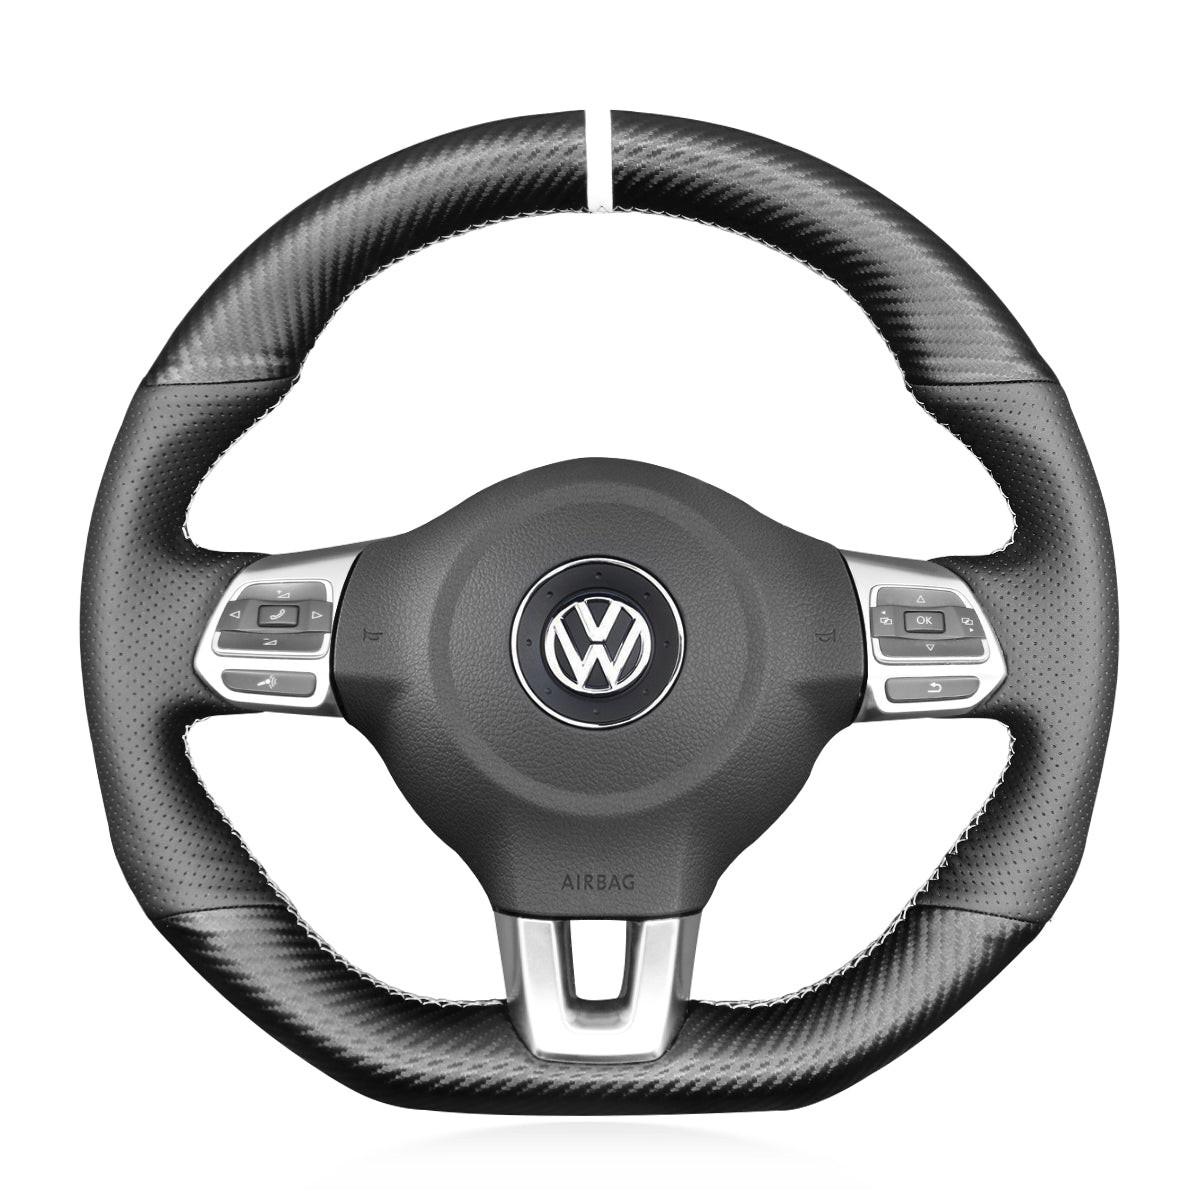 MEWANT Black PU Leather Suede Carbon Fiber Car Steering Wheel Cover for Volkswagen VW Golf 6 Polo GTI Scirocco Tiguan (R-Line)